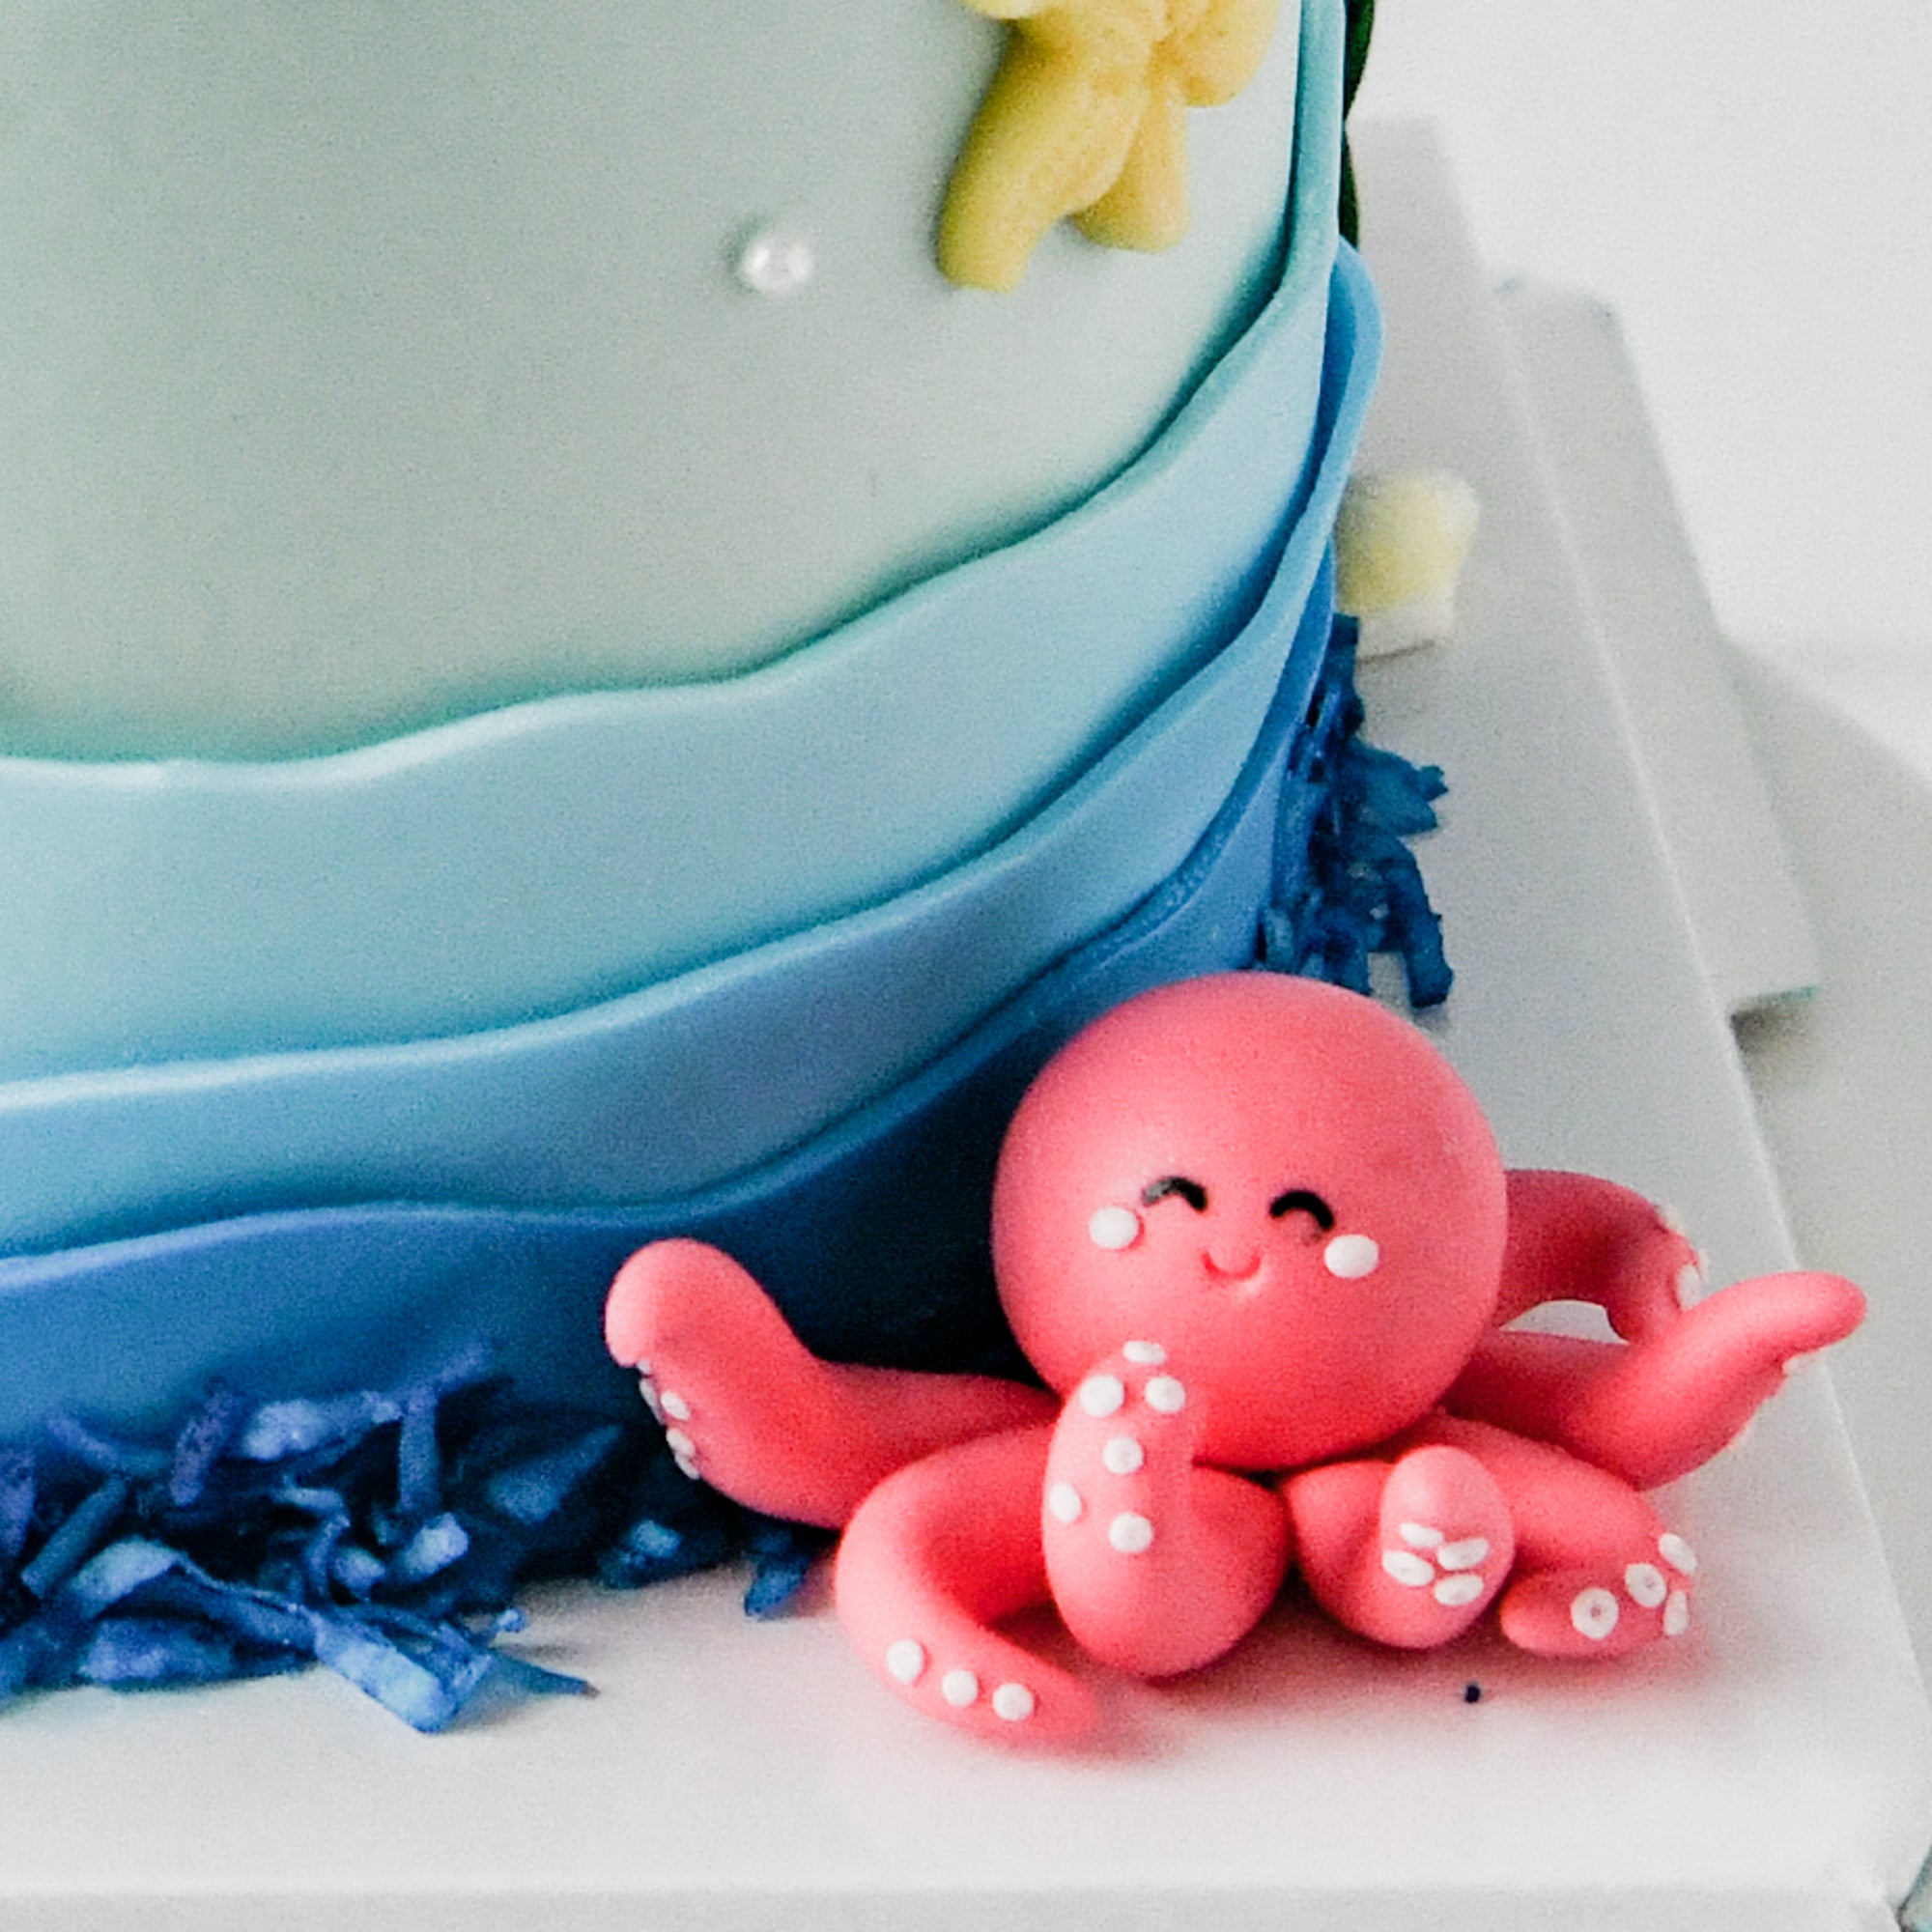 Cakes By Carol - Todays theme is 'Sea creatures' so let's... | Facebook